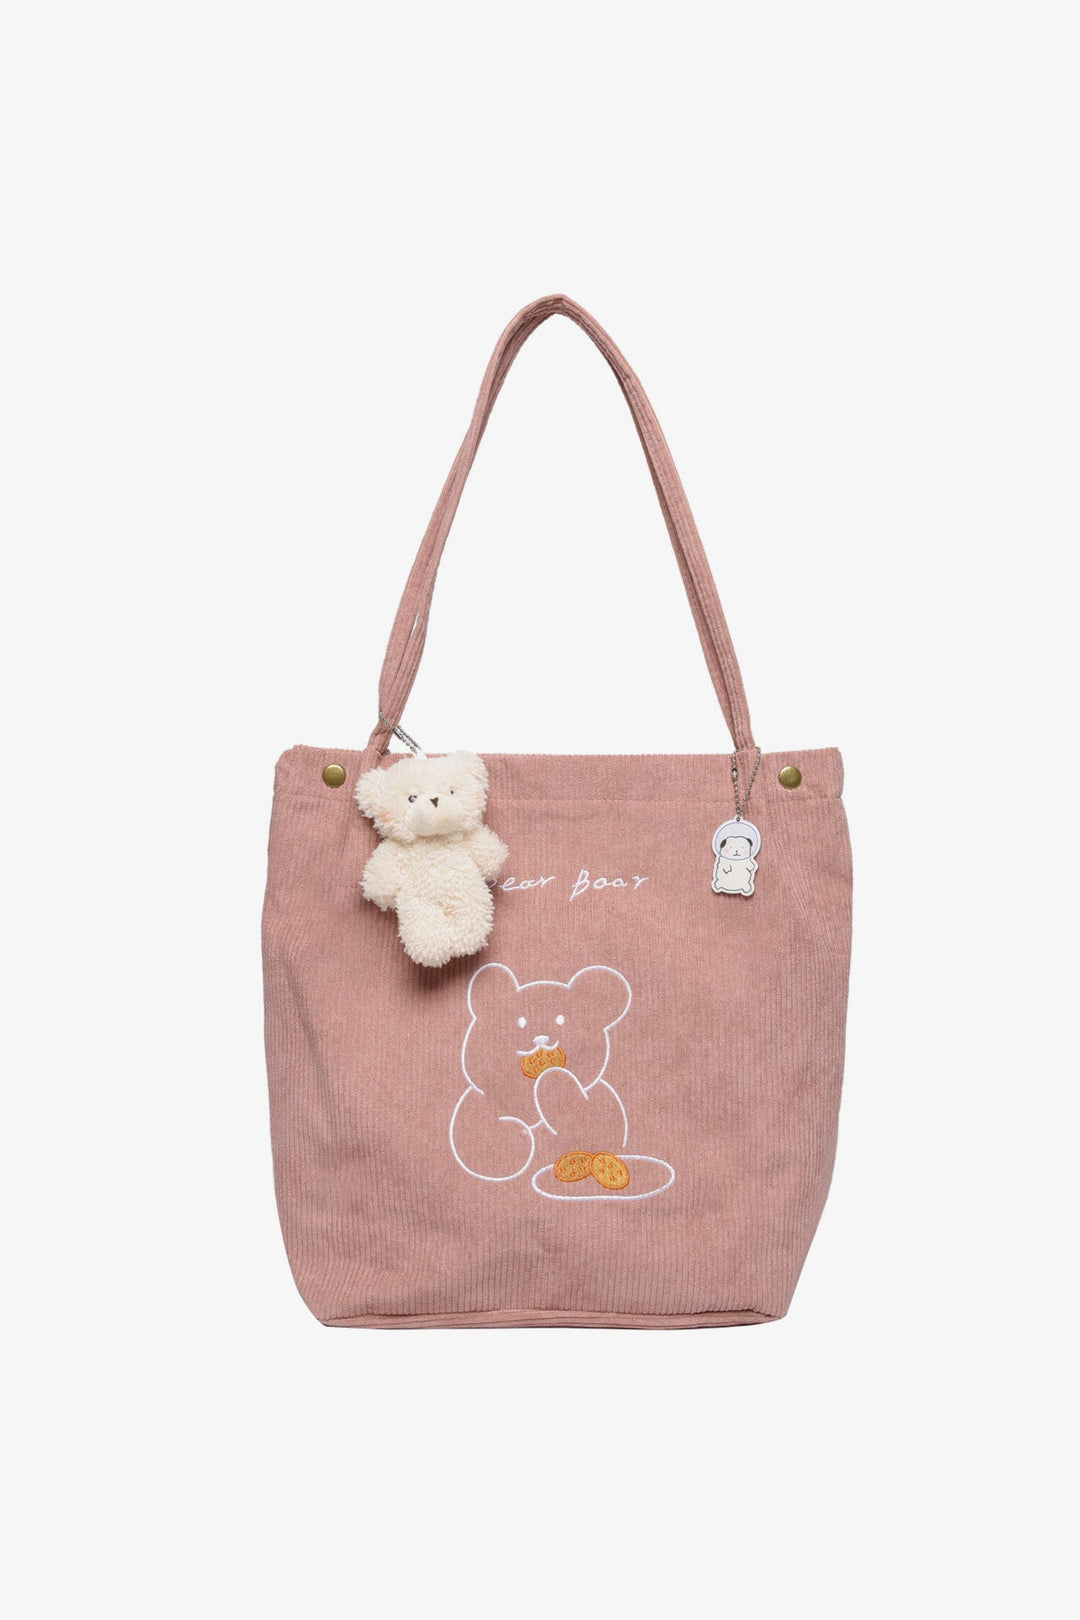 Tote Bear Embroidered Bag - A23 - WHB0055